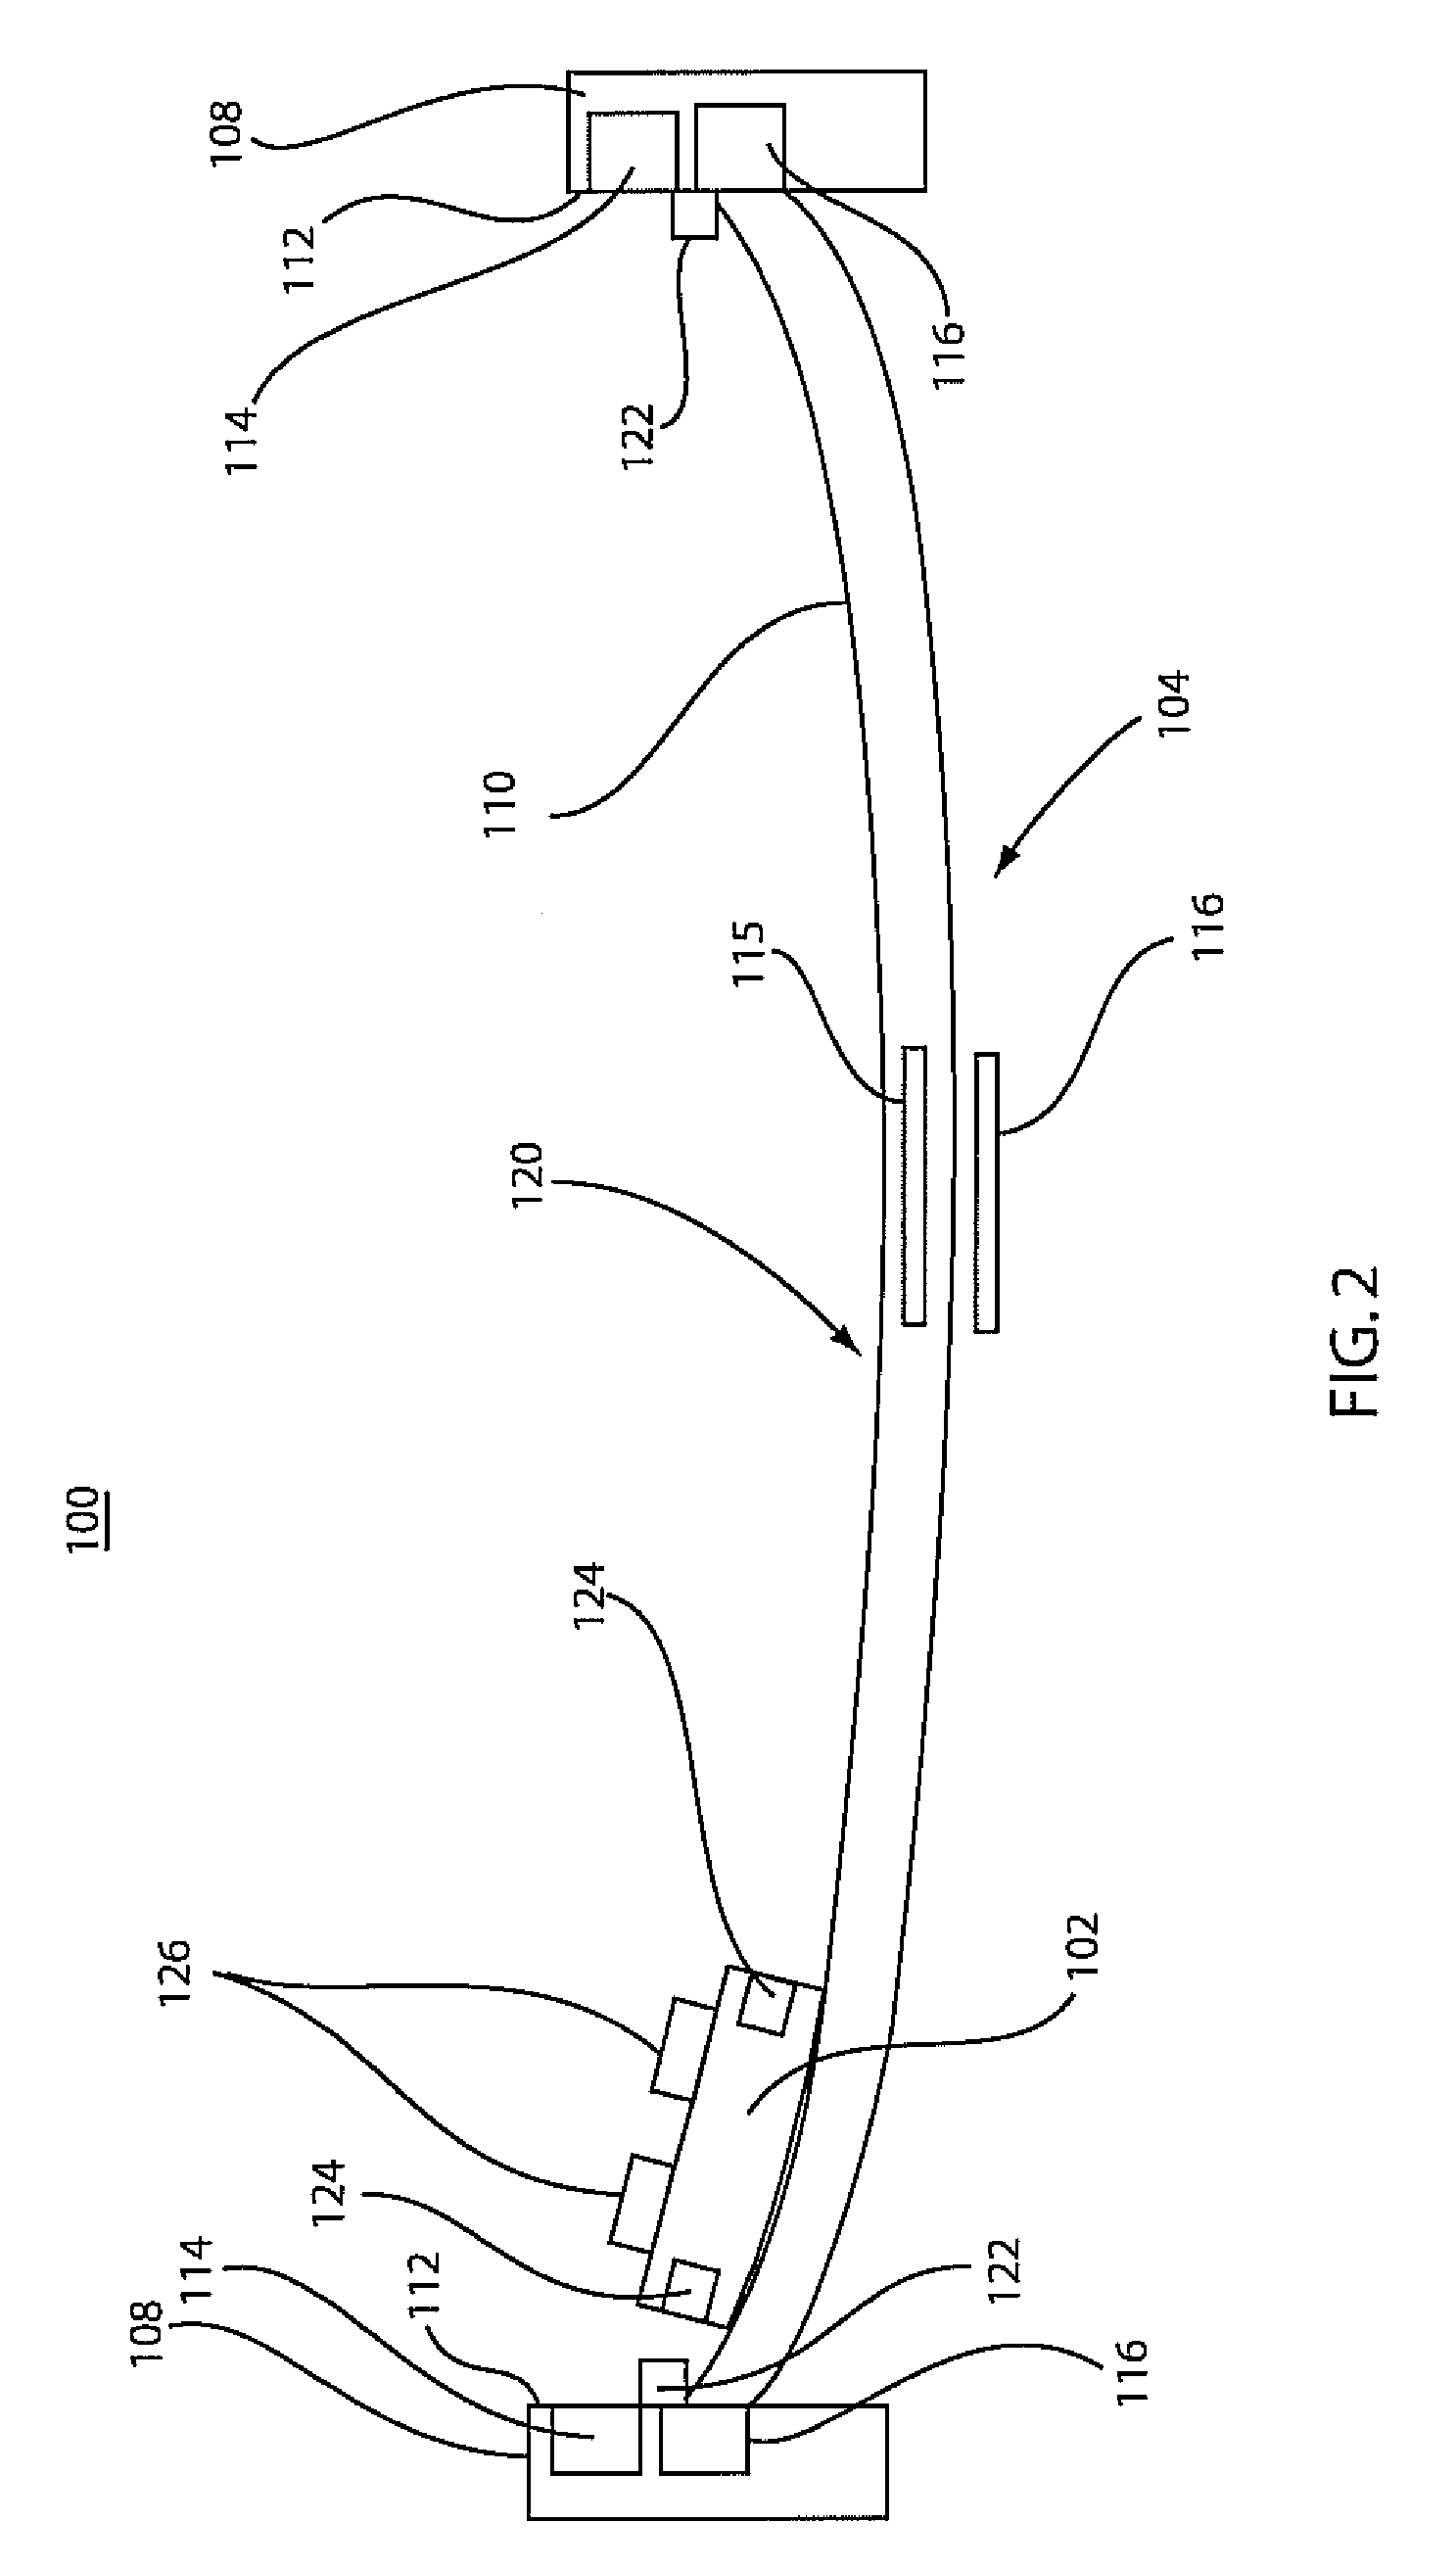 Pointing device and method with error prevention features